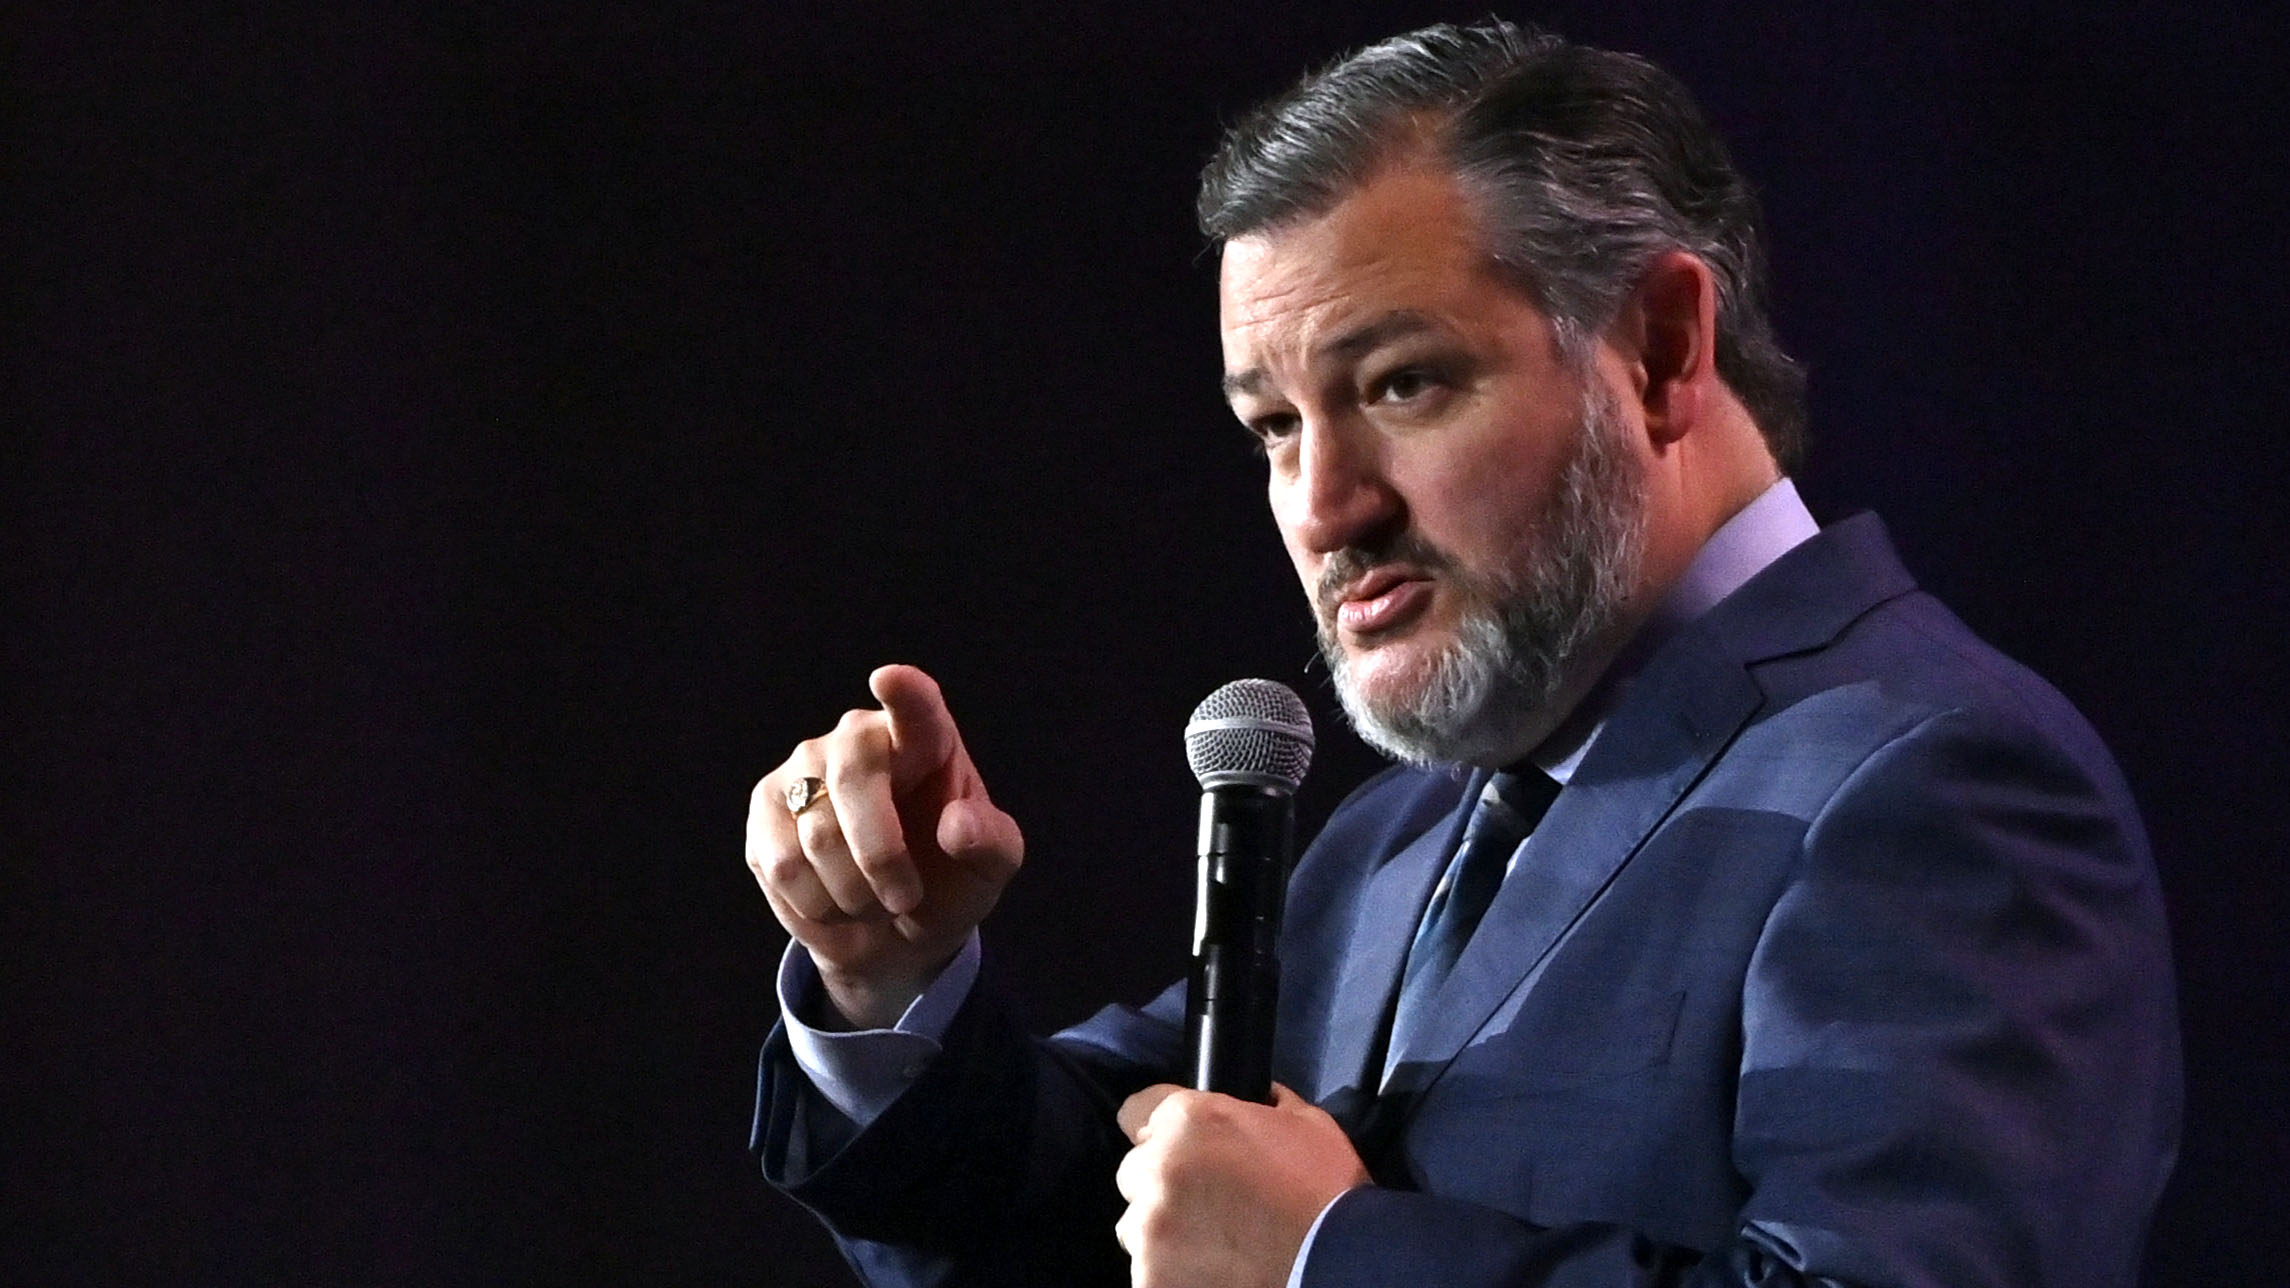 Ted Cruz Torches Bud Light Over Trans Controversy: ‘Have They Ever Met A Typical Bud Light Drinker?’